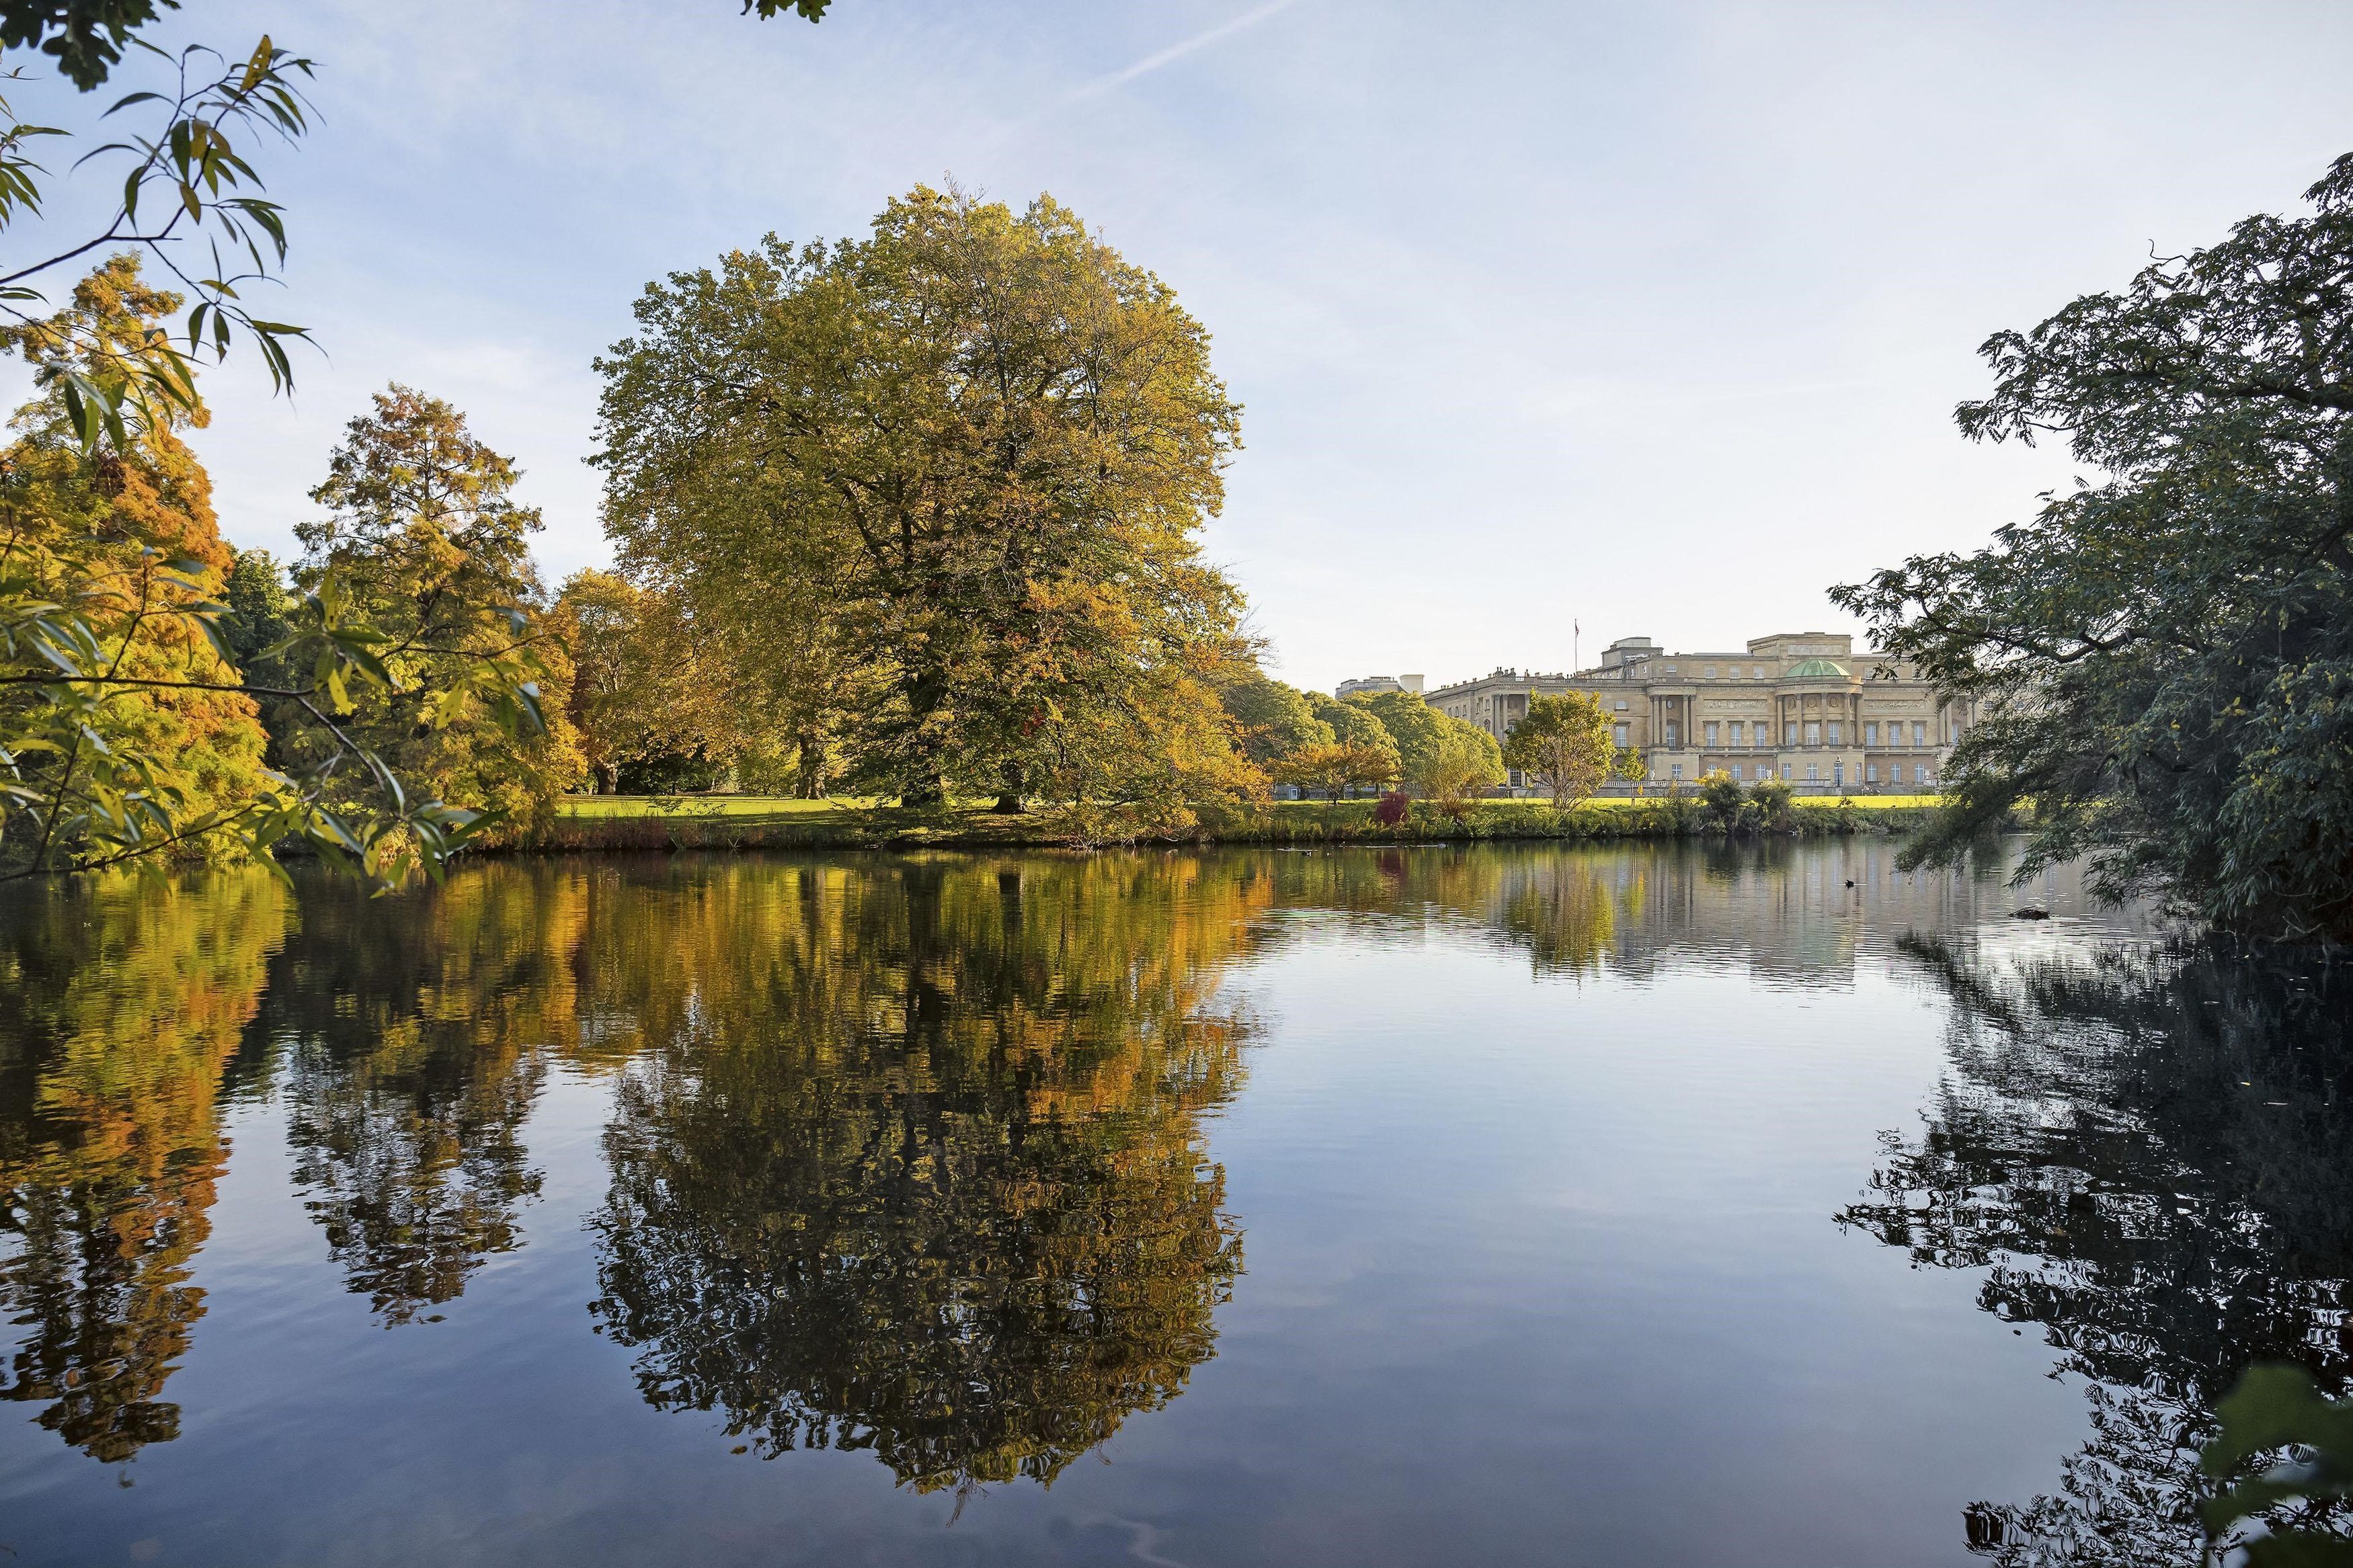 The 3.5 acre lake is set in 35 acres of gardens dating back to the 1820s